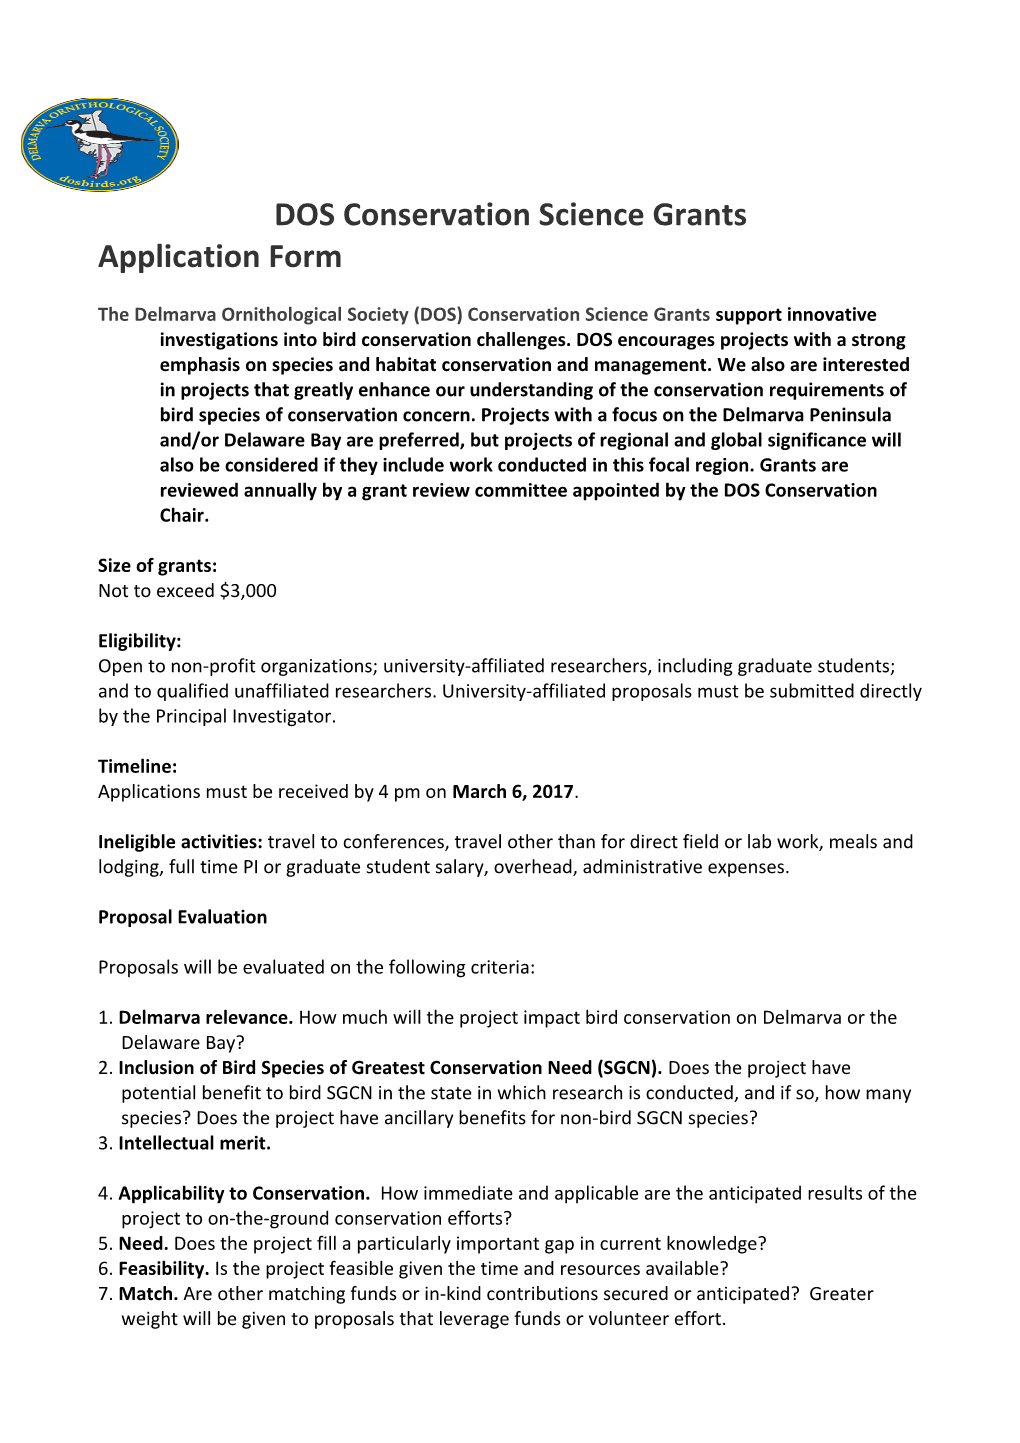 DOS Conservation Grant Application